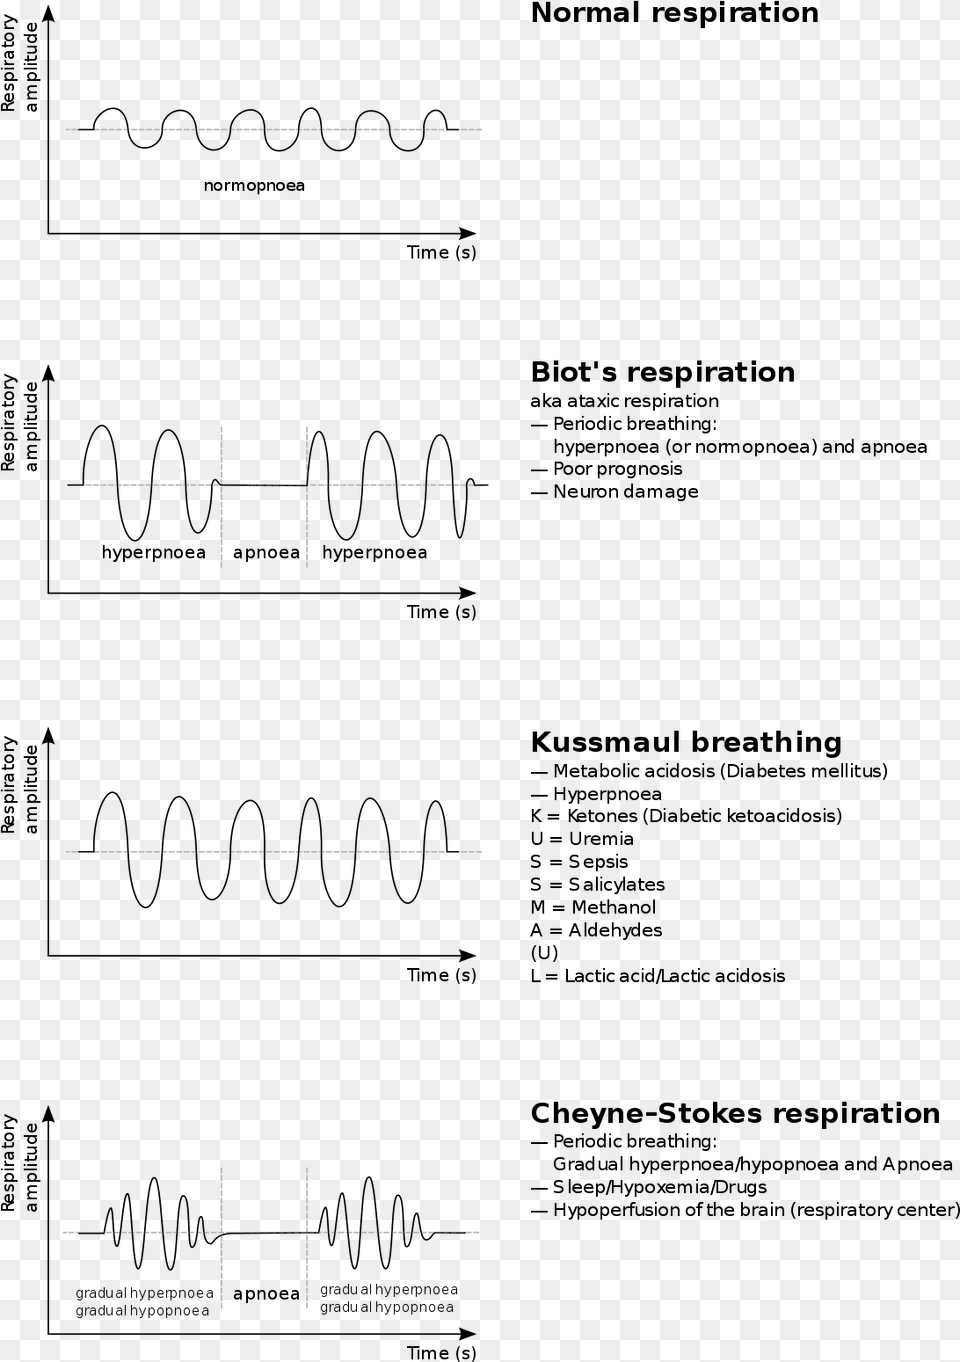 Cheyne Stokes Respiration Kussmaul Breathing, Text Free Transparent Png